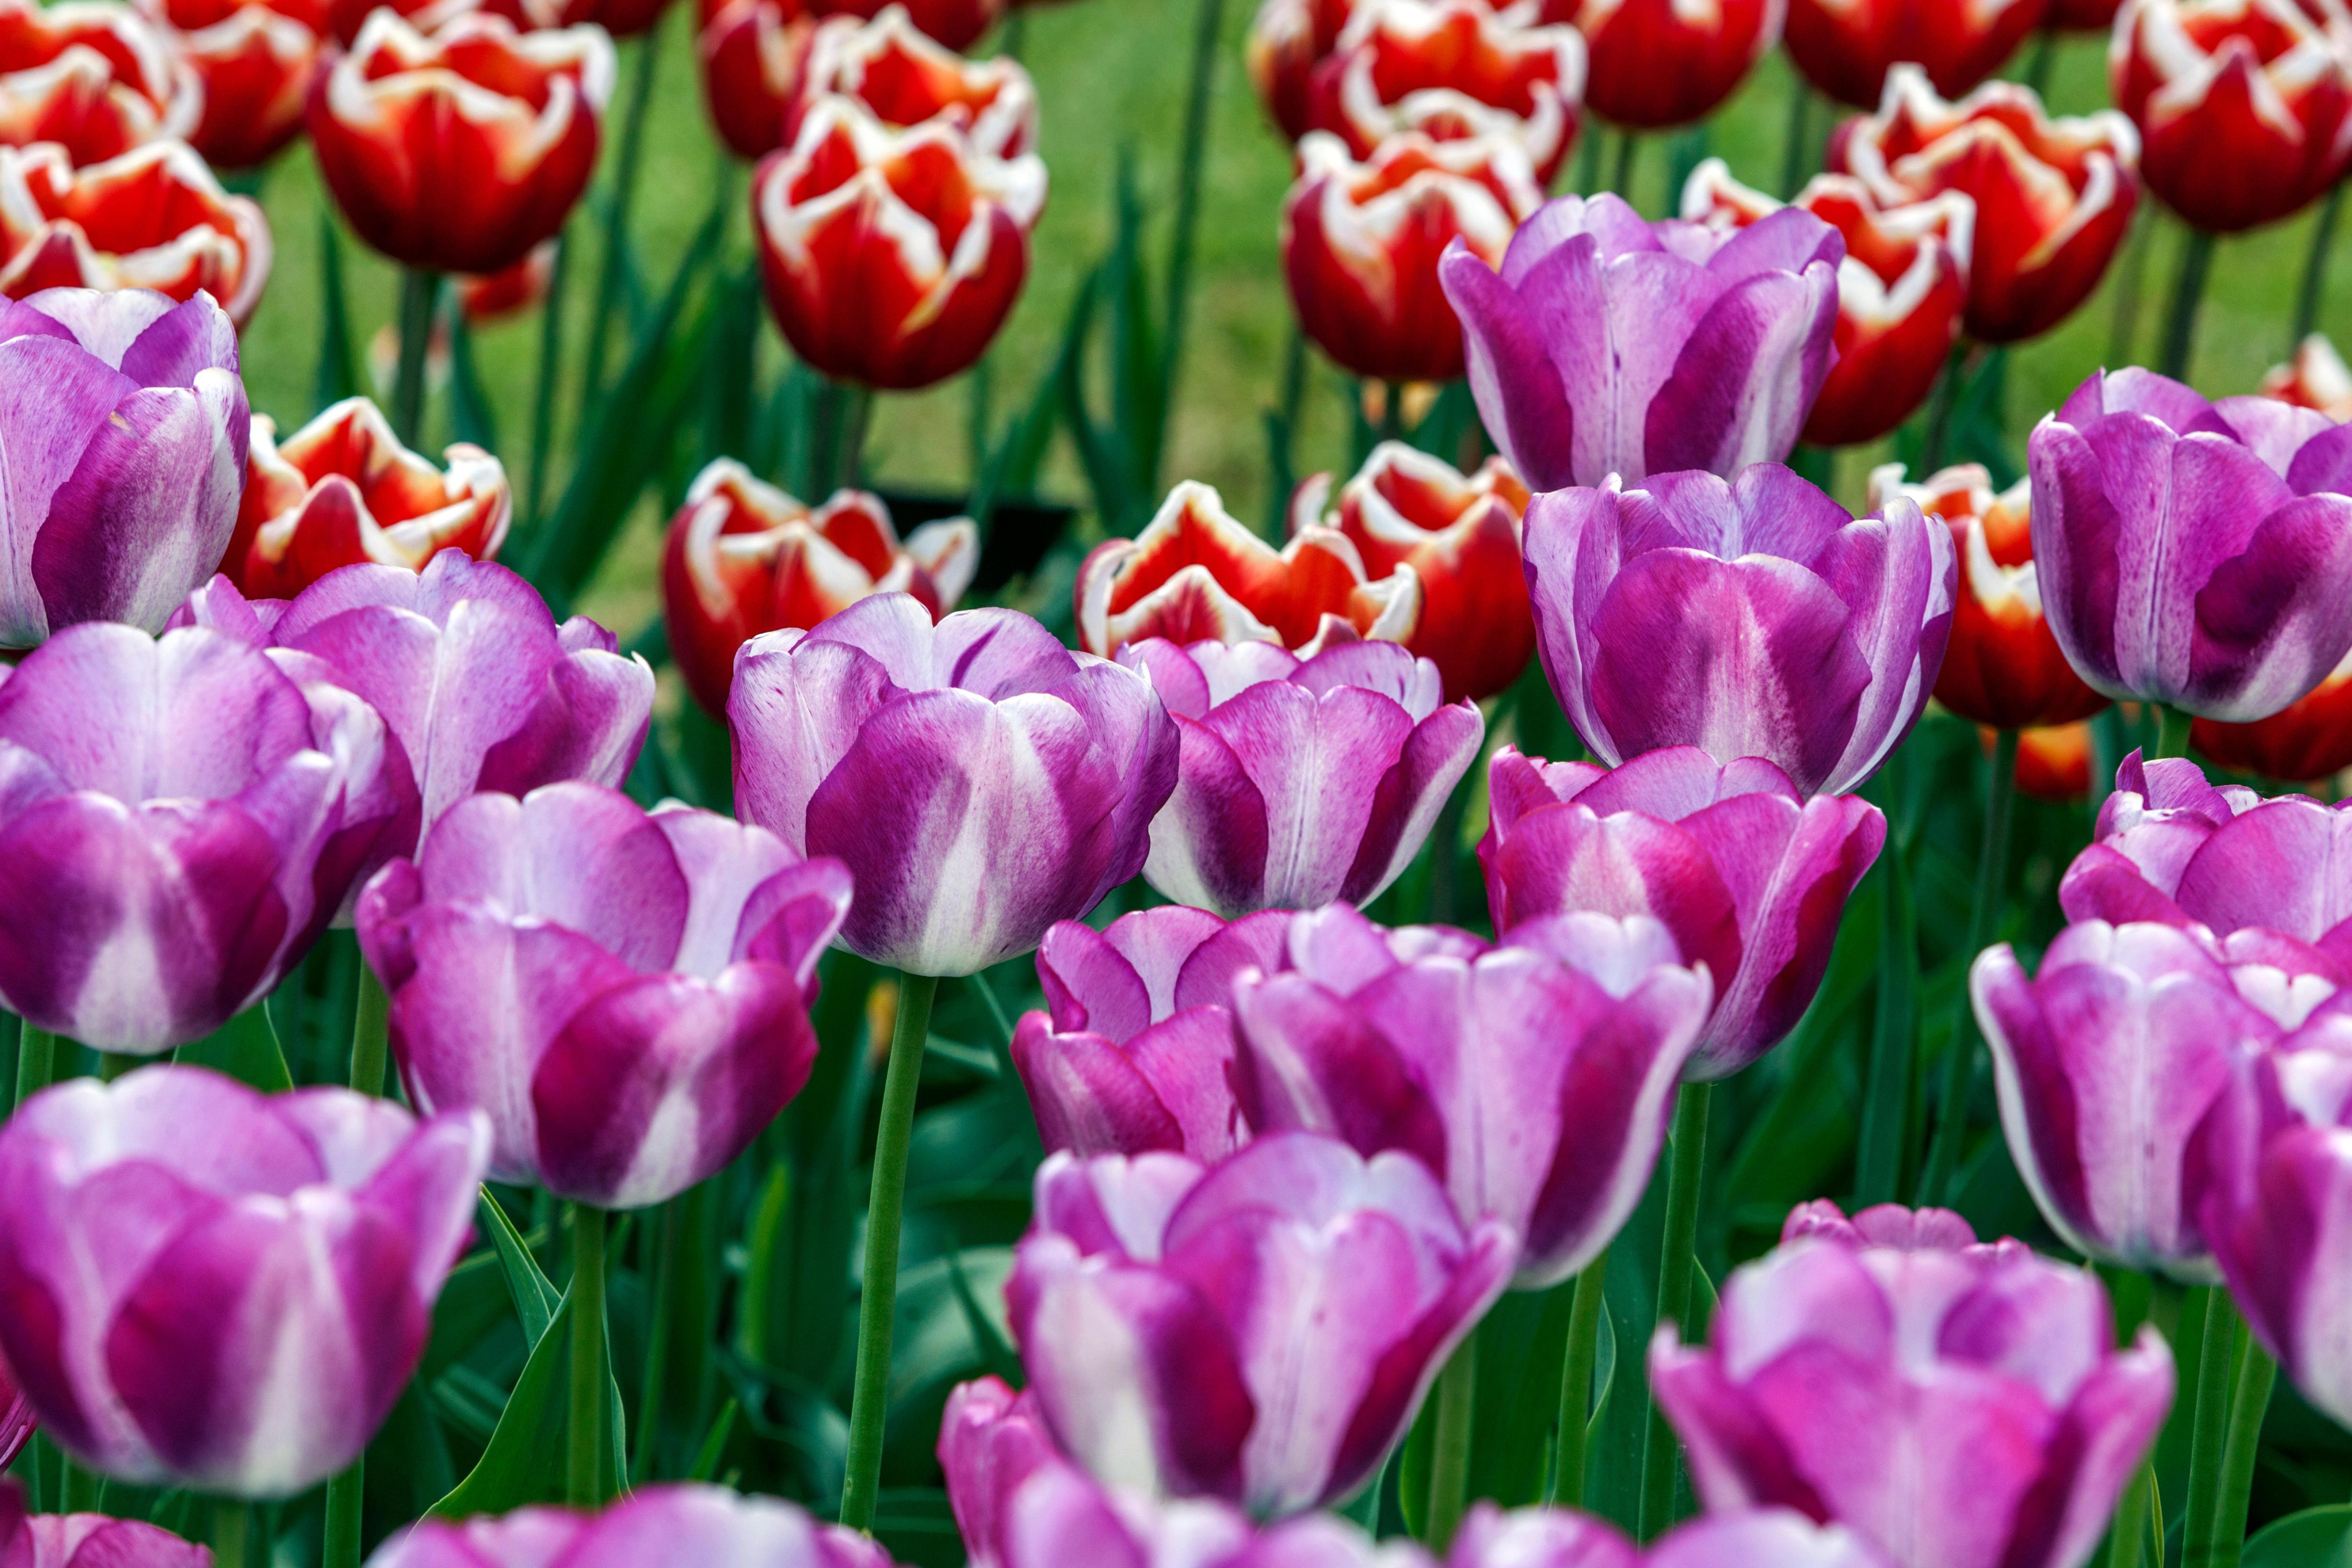 Seven of the best jewel tulips to add sparkle to your garden